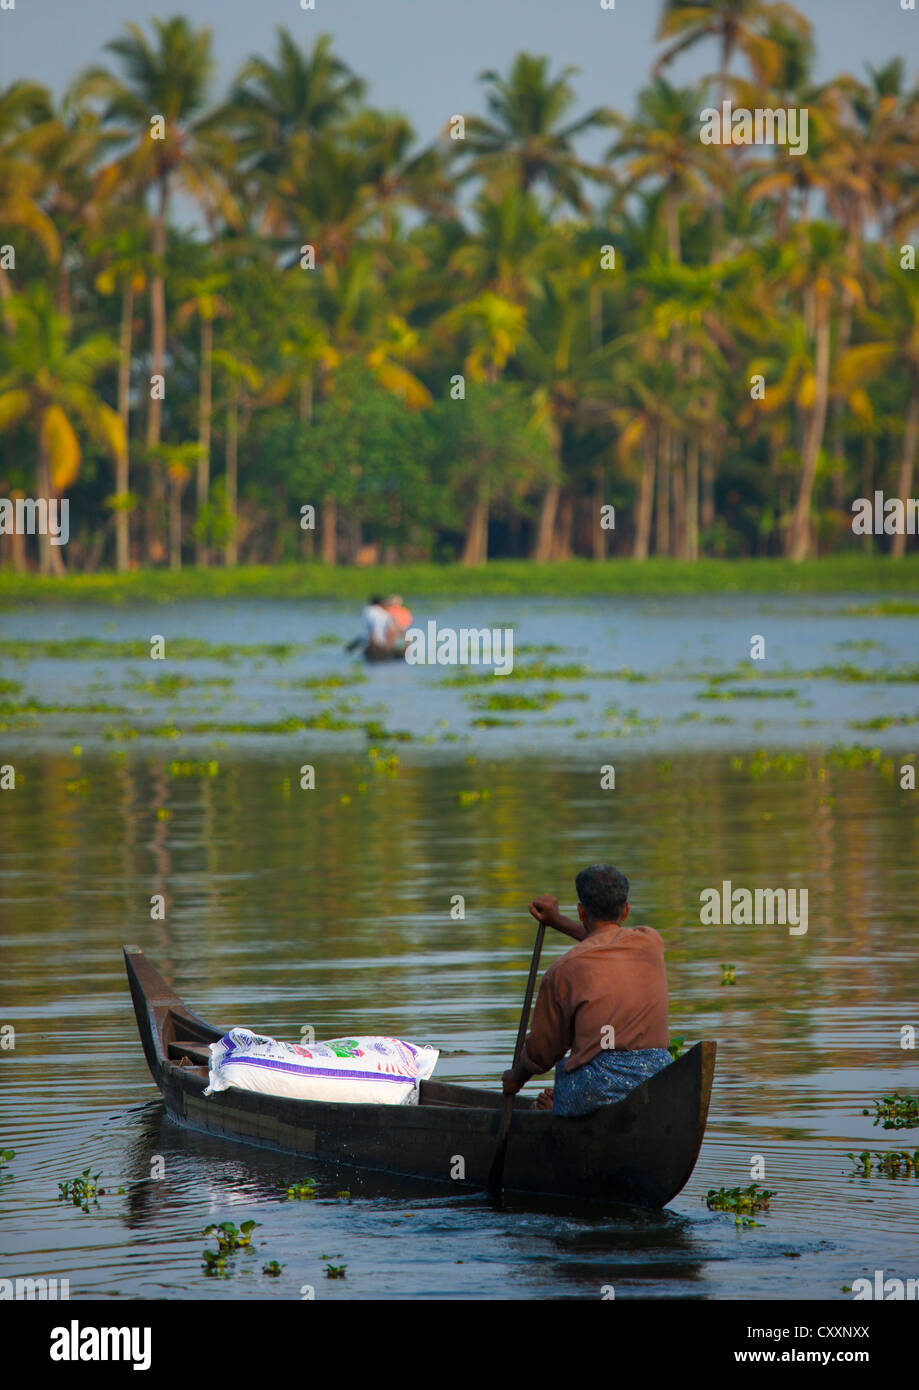 Men Rowing Pirogues In Kerala Backwaters, Alleppey, India Stock Photo -  Alamy